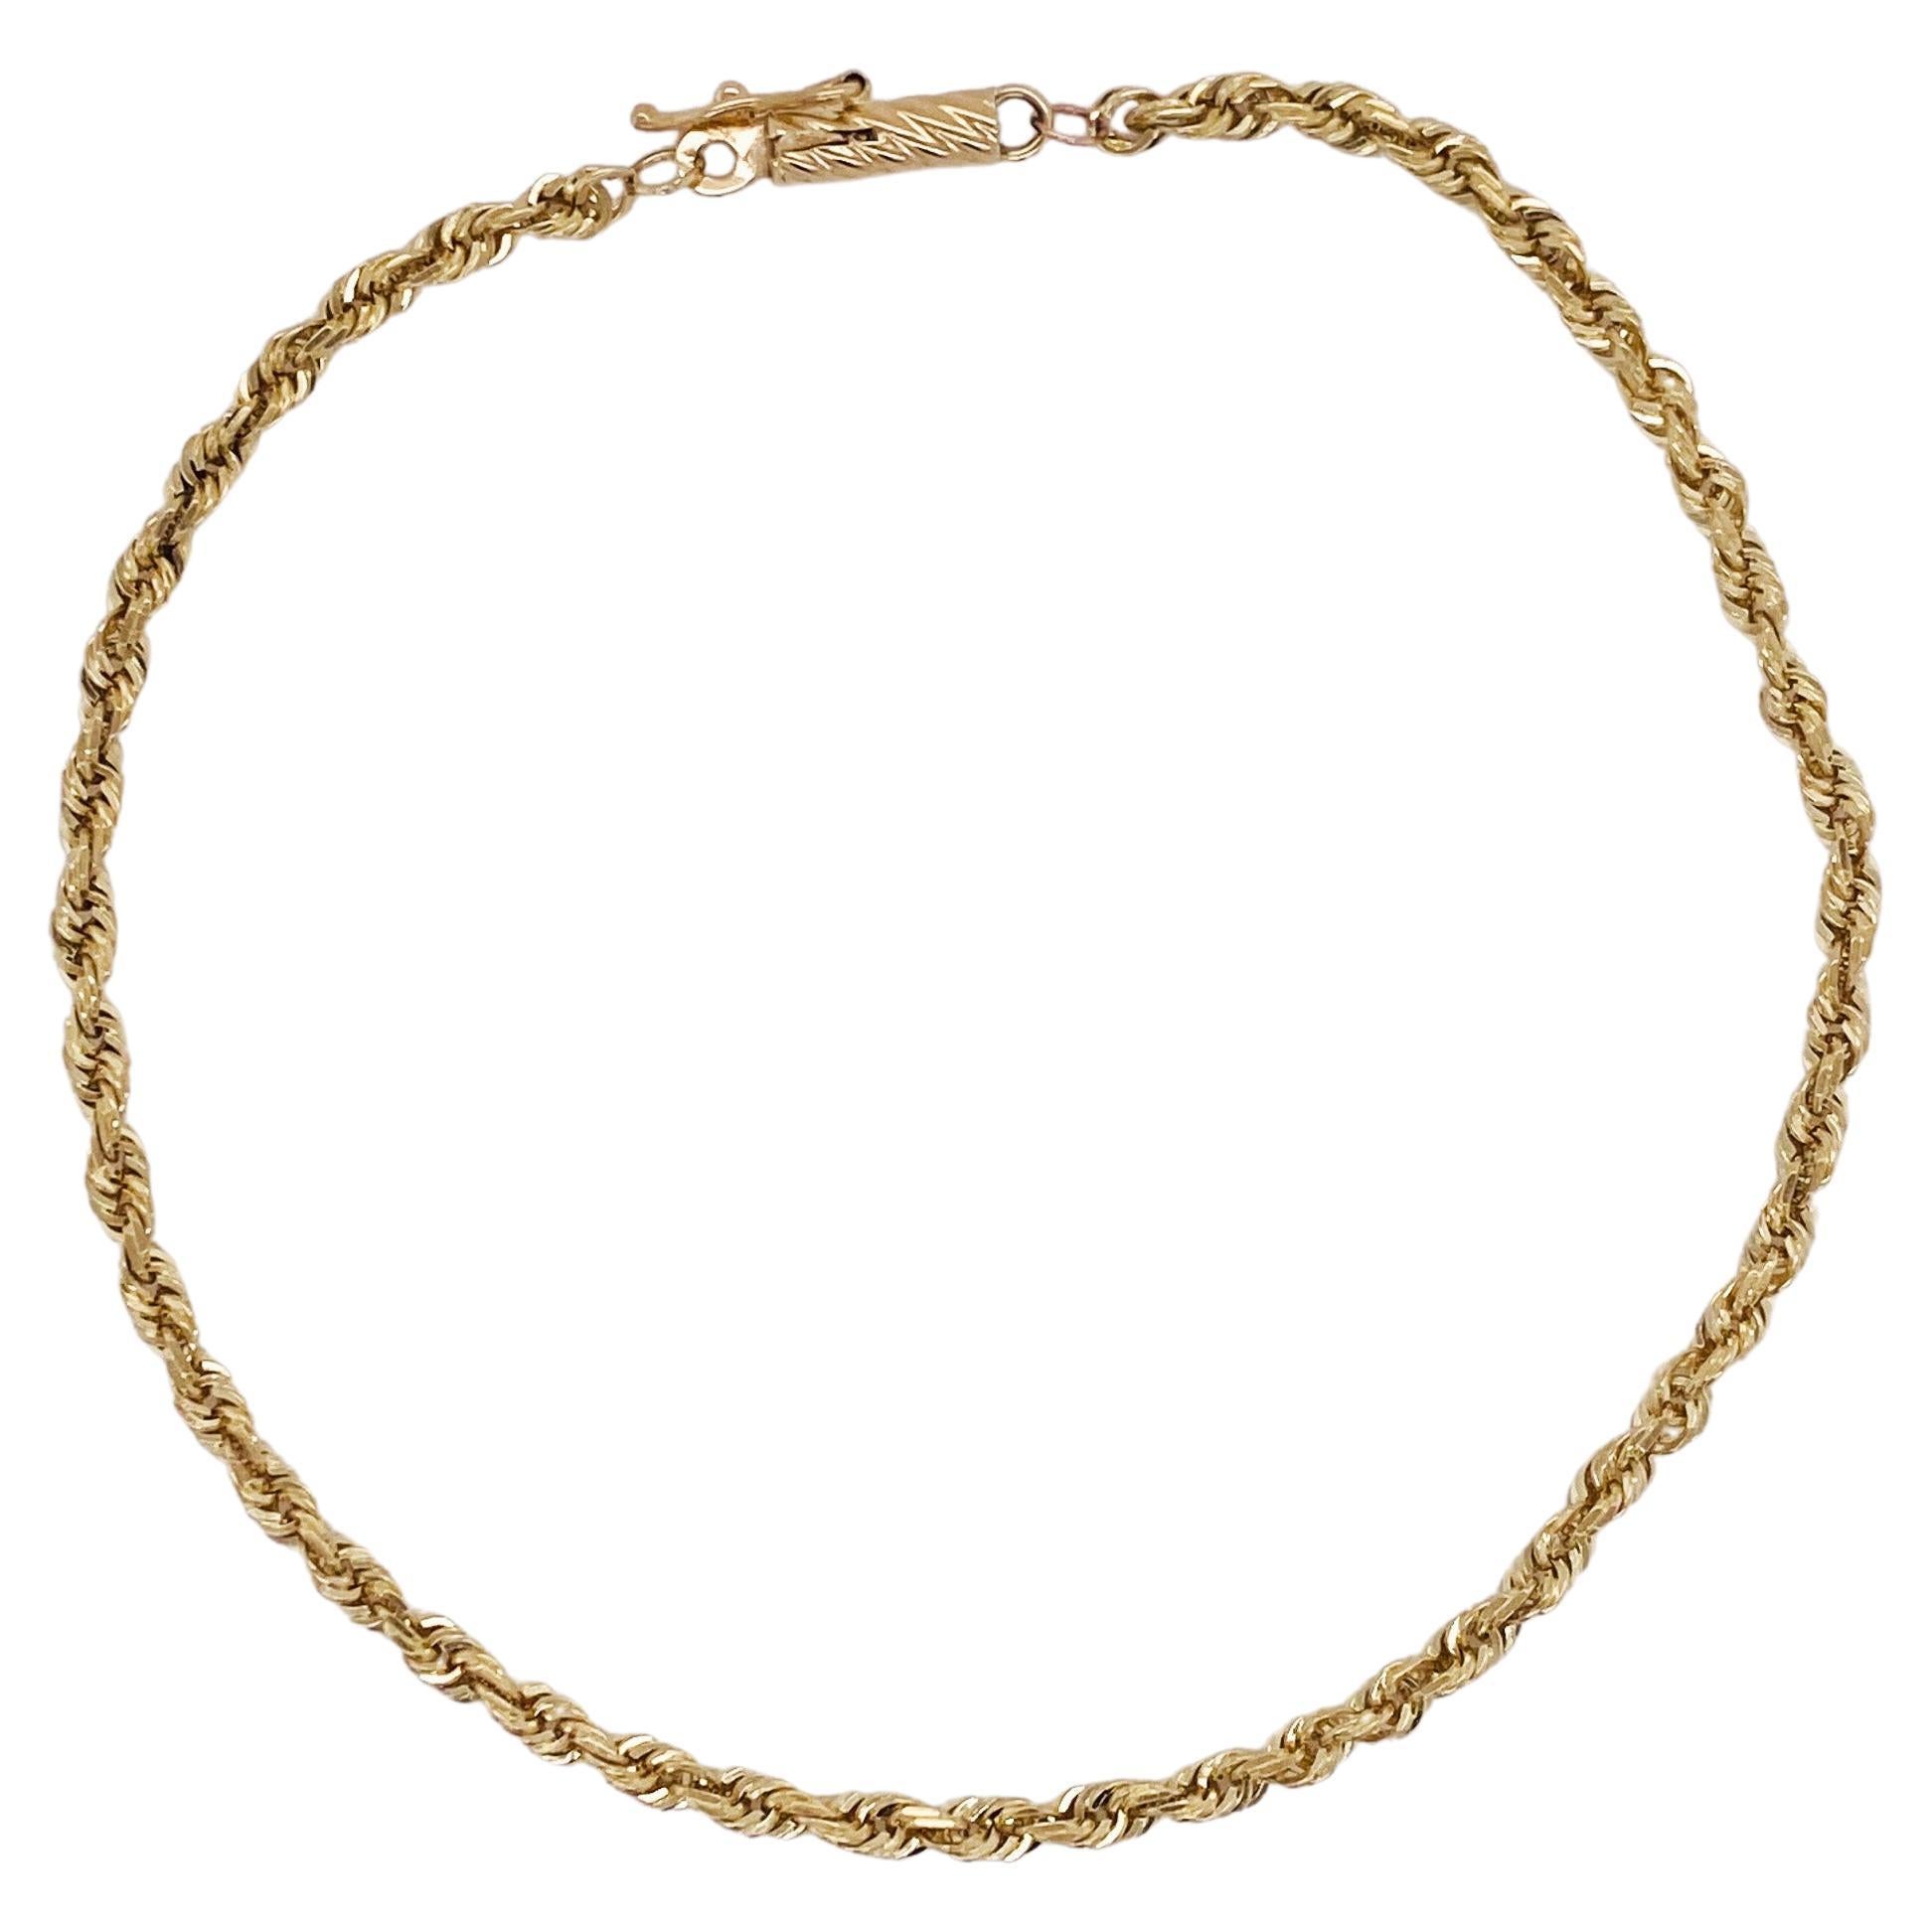 Slender Rope Chain Bracelet in 14K Yellow Gold 8", Barrel Clasp, Stackable LV For Sale